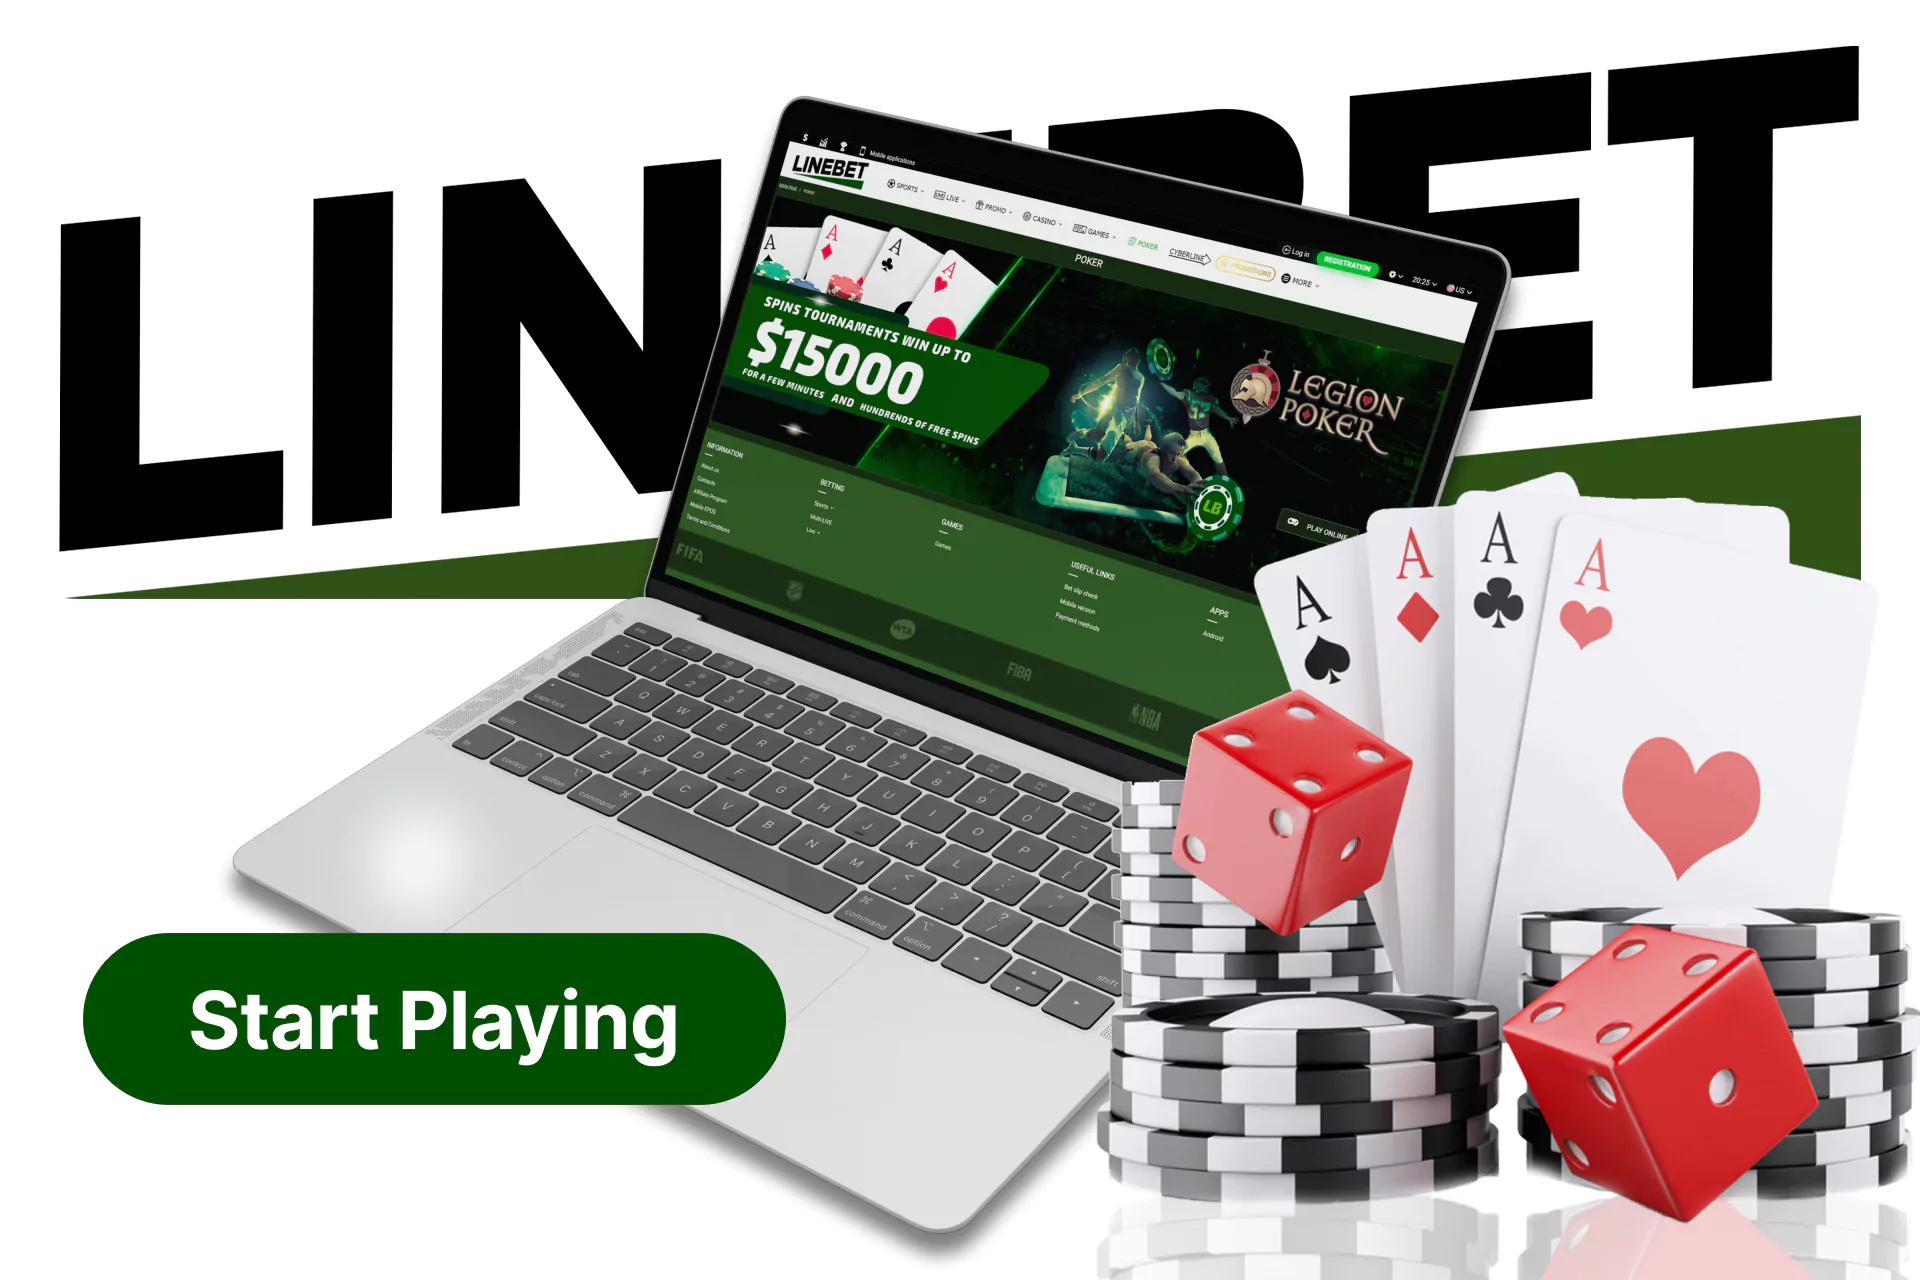 In Linebet, if you are a fan of card games, place bets on poker and enjoy the game.